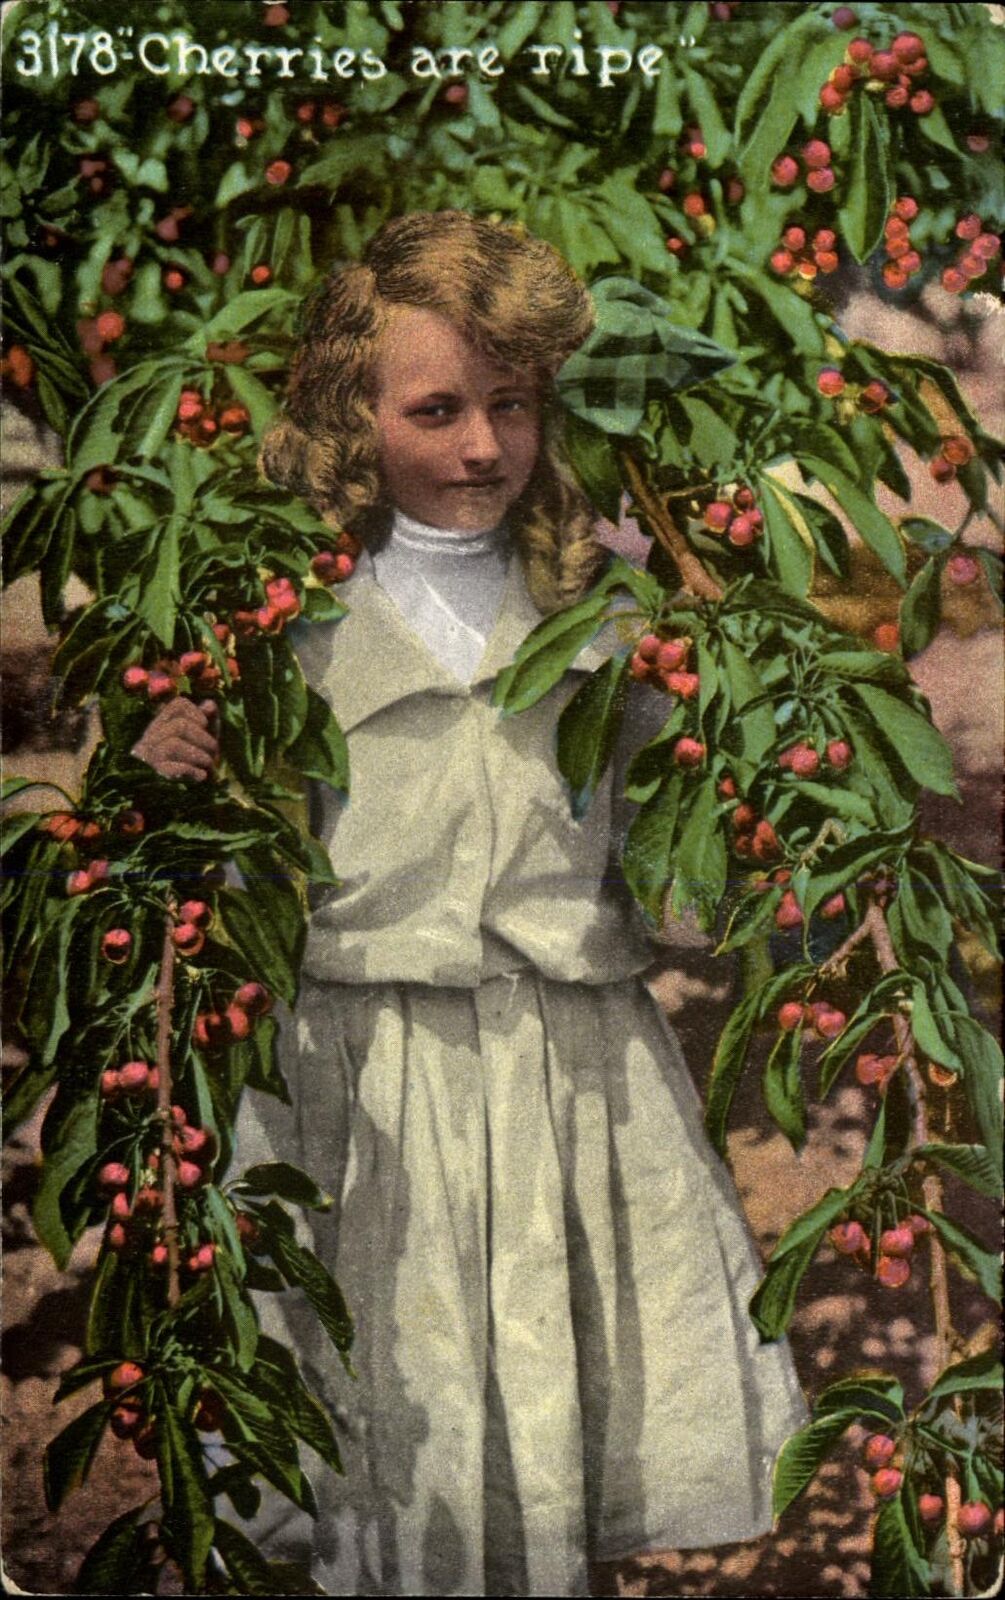 Cherries are Ripe ~ young girl sexual innuendo ~ Edward Mitchell Publ ~ c1910